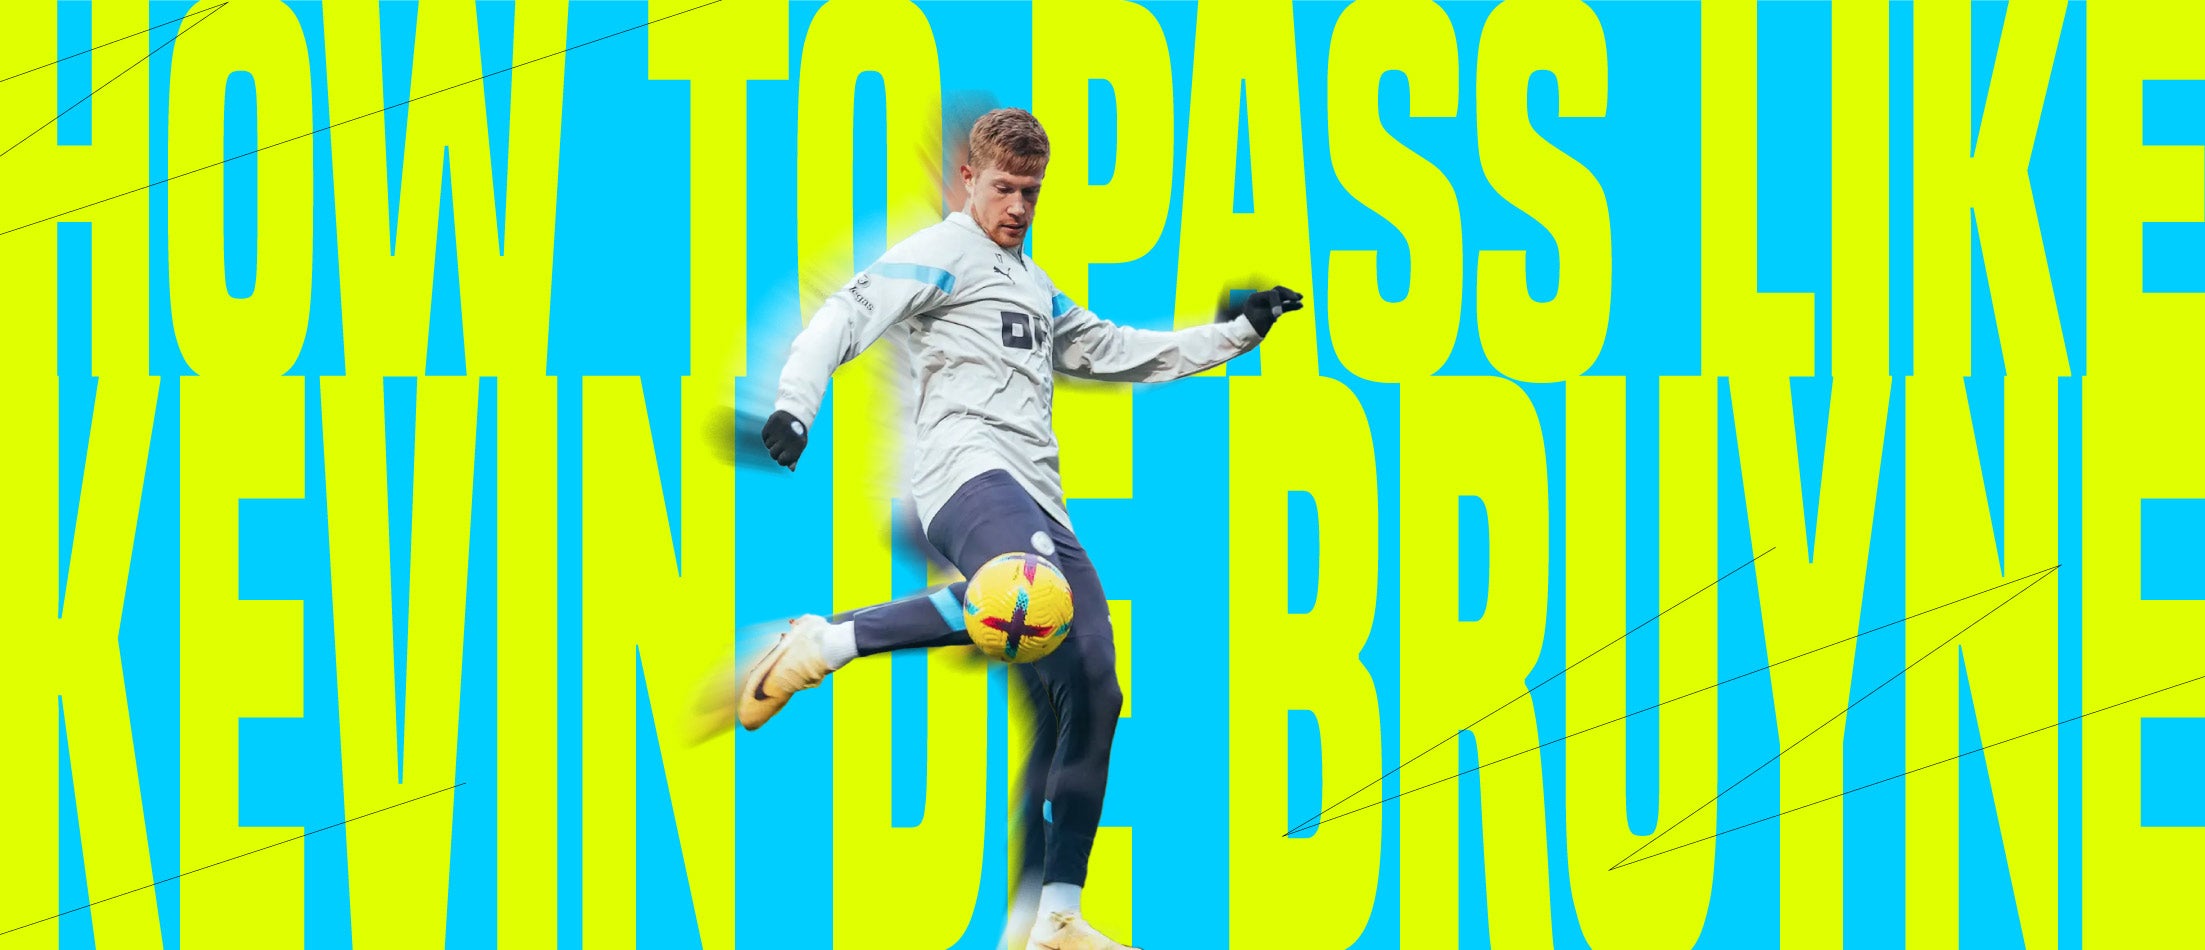 How to pass like Kevin De Bruyne